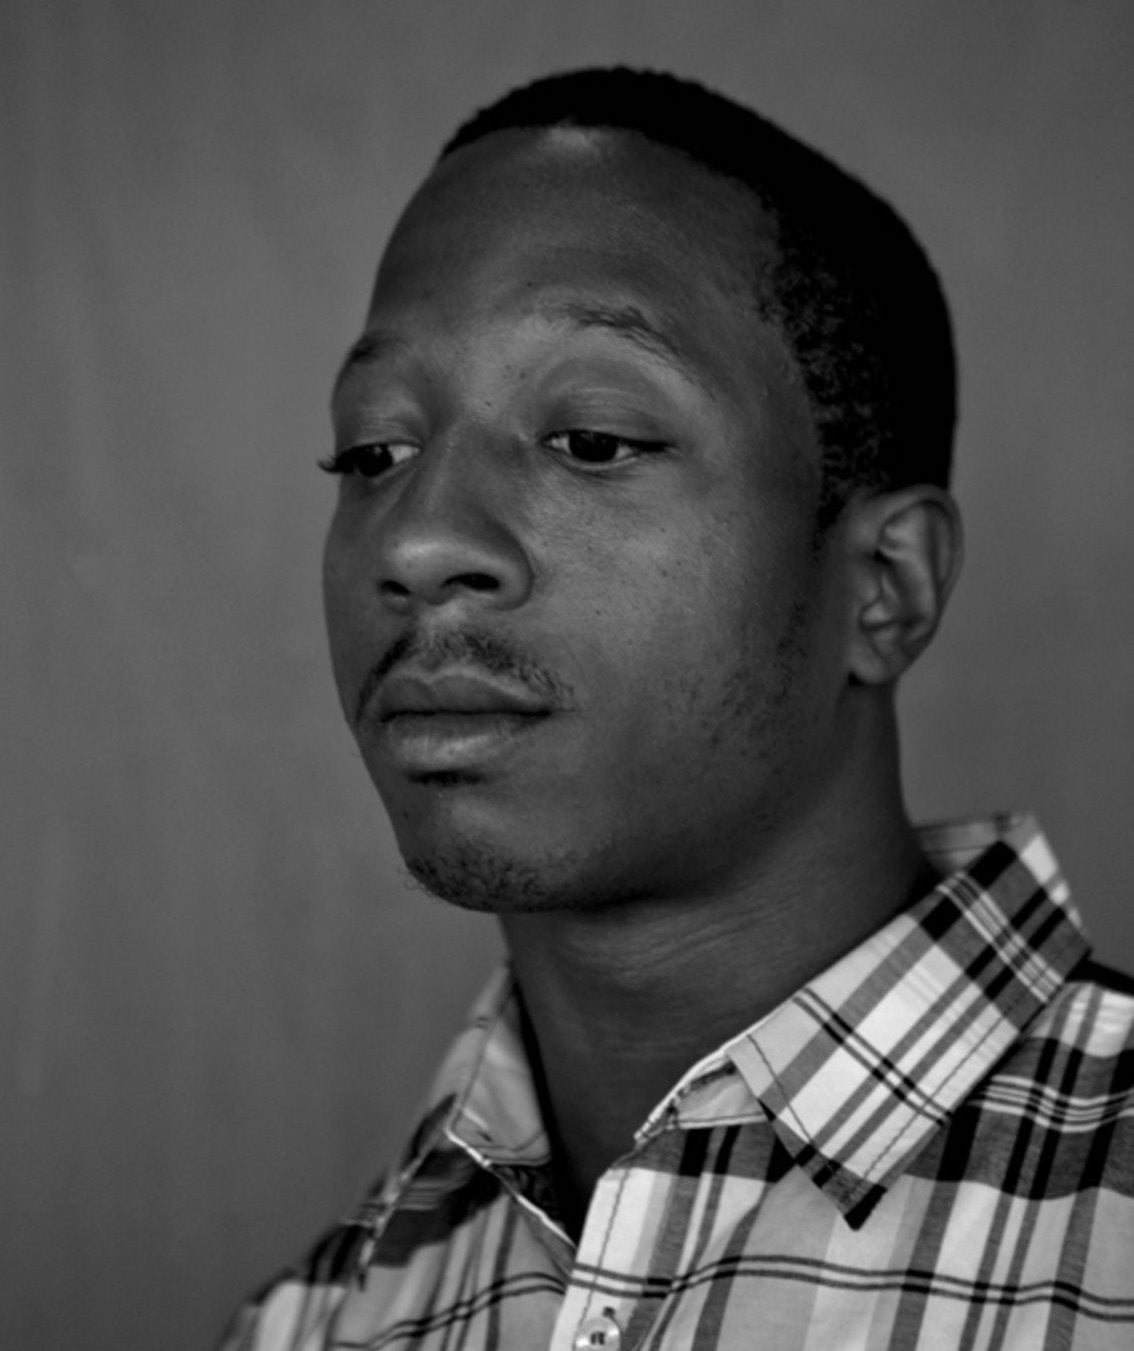 Kalief Browder's Family Reflect On His Life And Legacy Ahead Of TIME: The Kalief Browder Story
